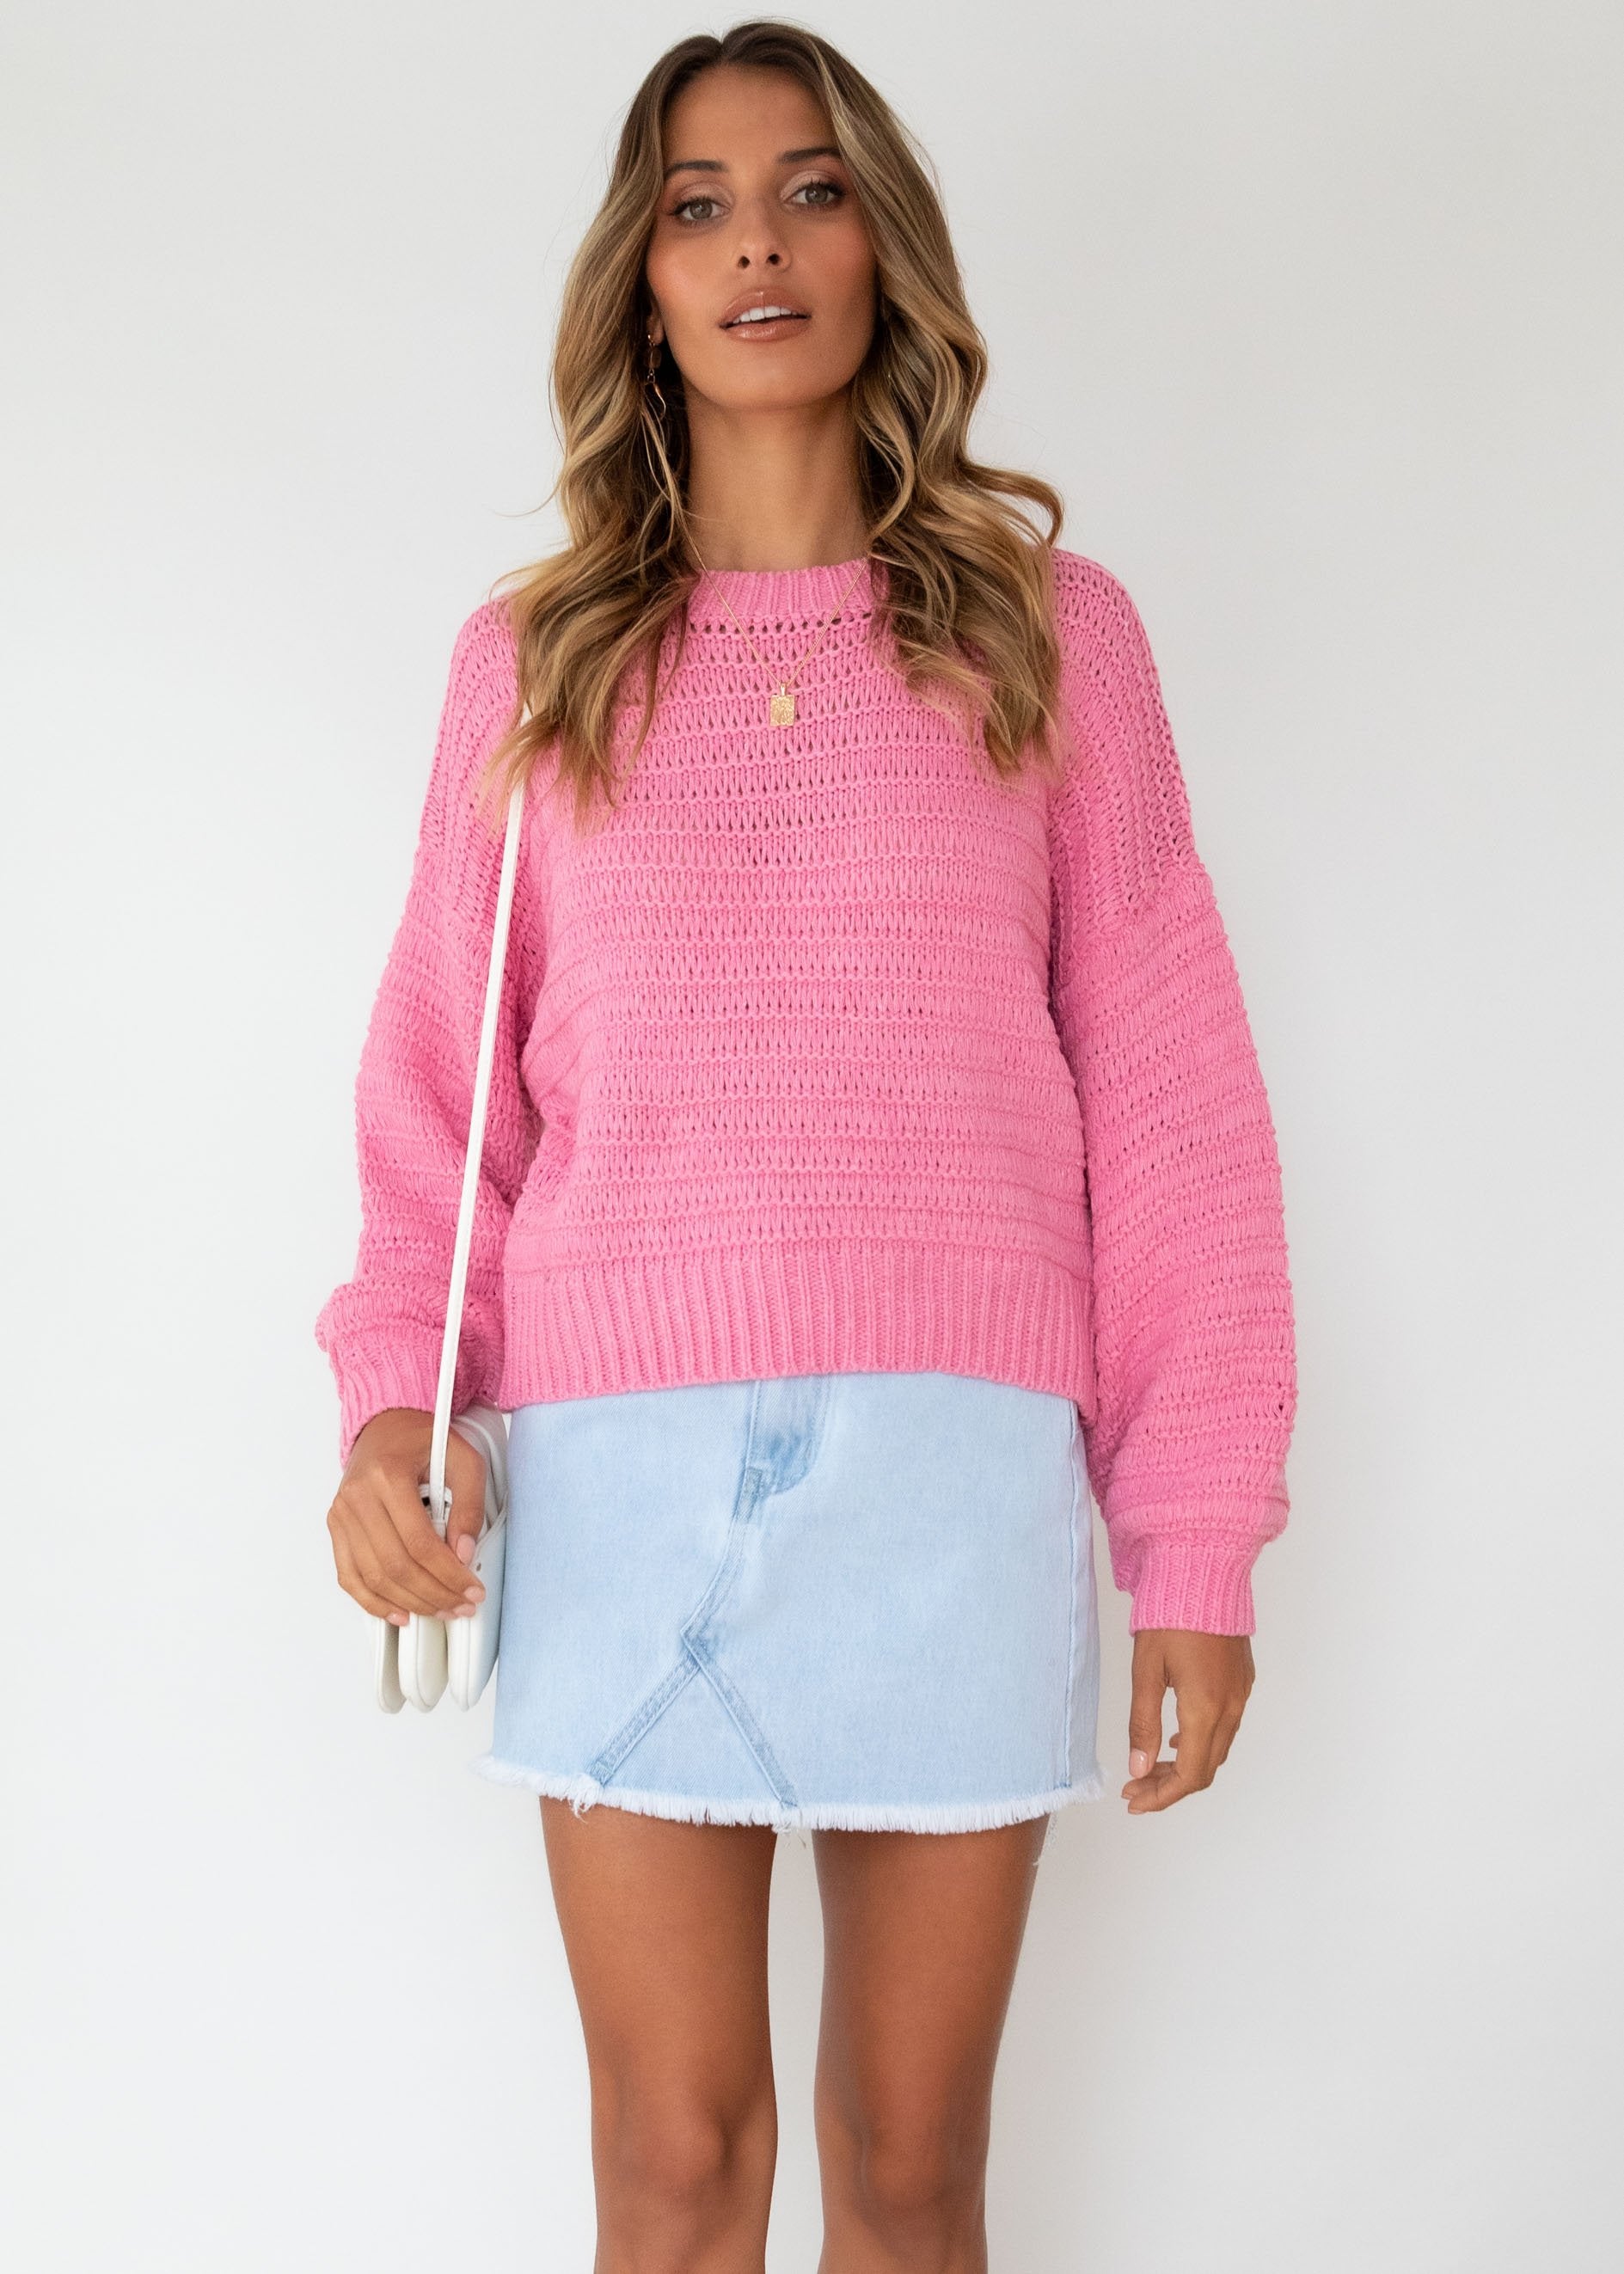 Brantley Knit Sweater - Pink